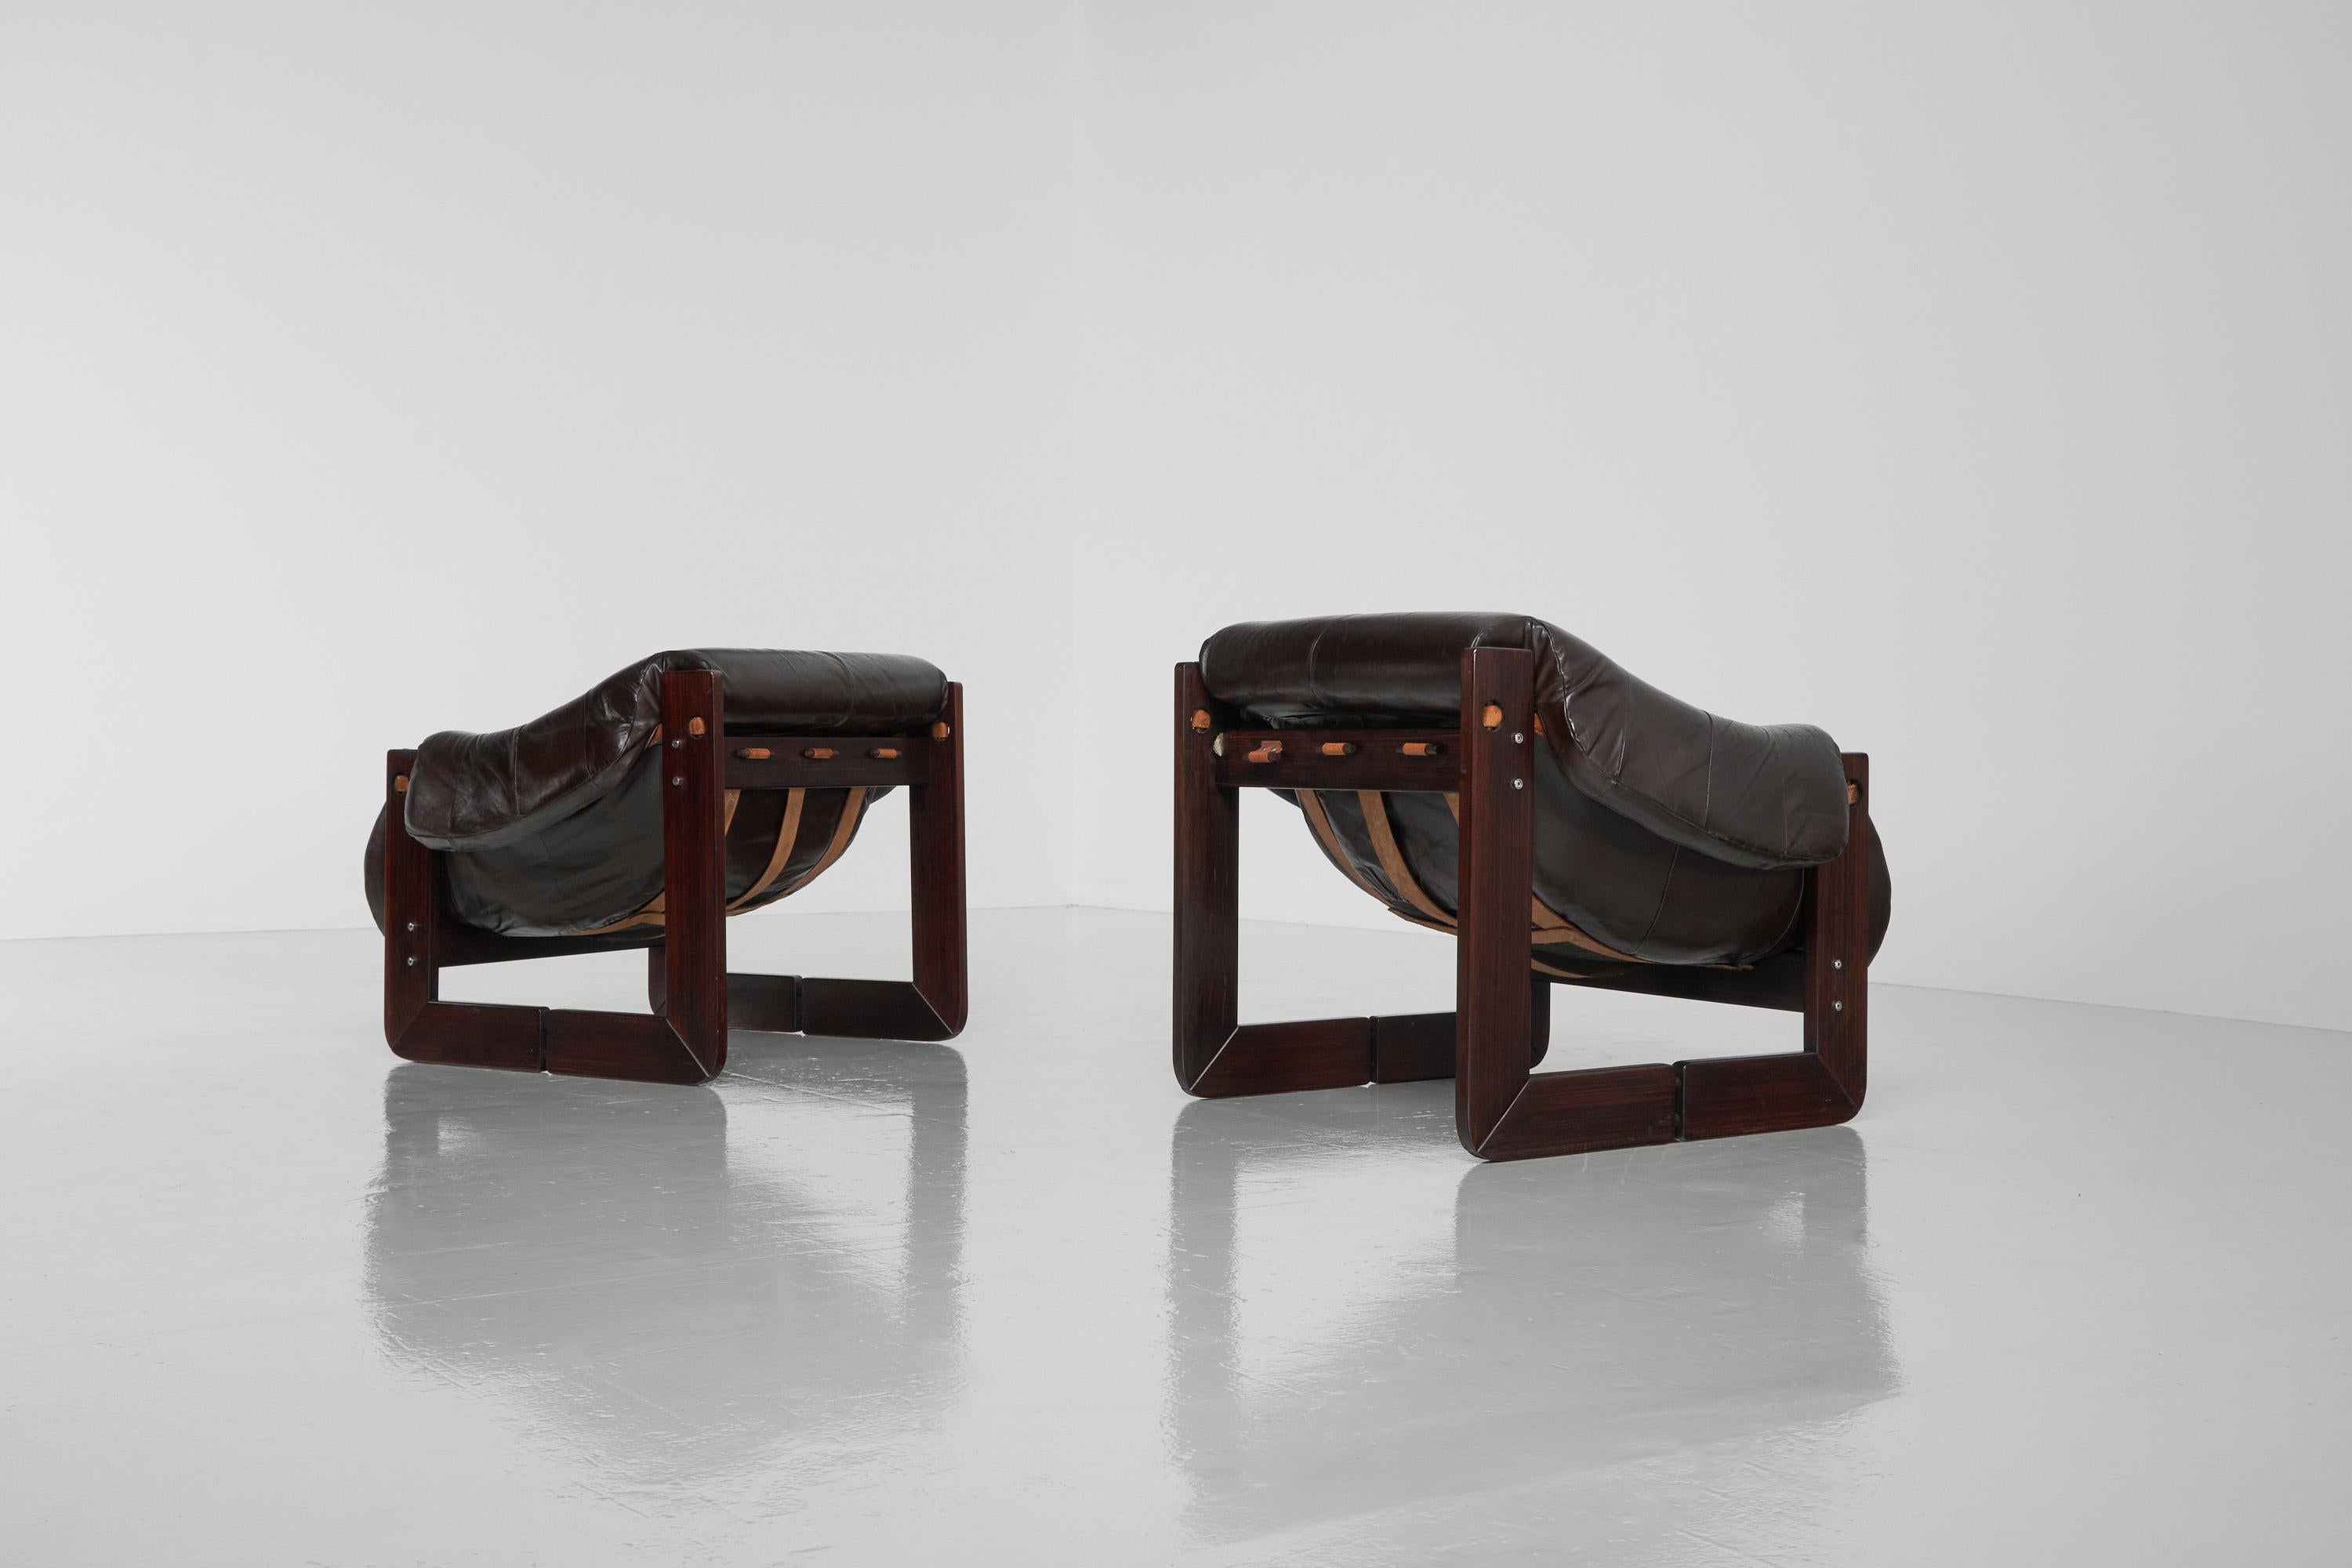 Very nice sculptural pair of MP97 lounge chairs designed and manufactured by MP Lafer, Brazil 1970. Percival Lafer was one of the leading furniture design manufacturers in Brazil who managed to produce furniture on a large, industrial scale. This